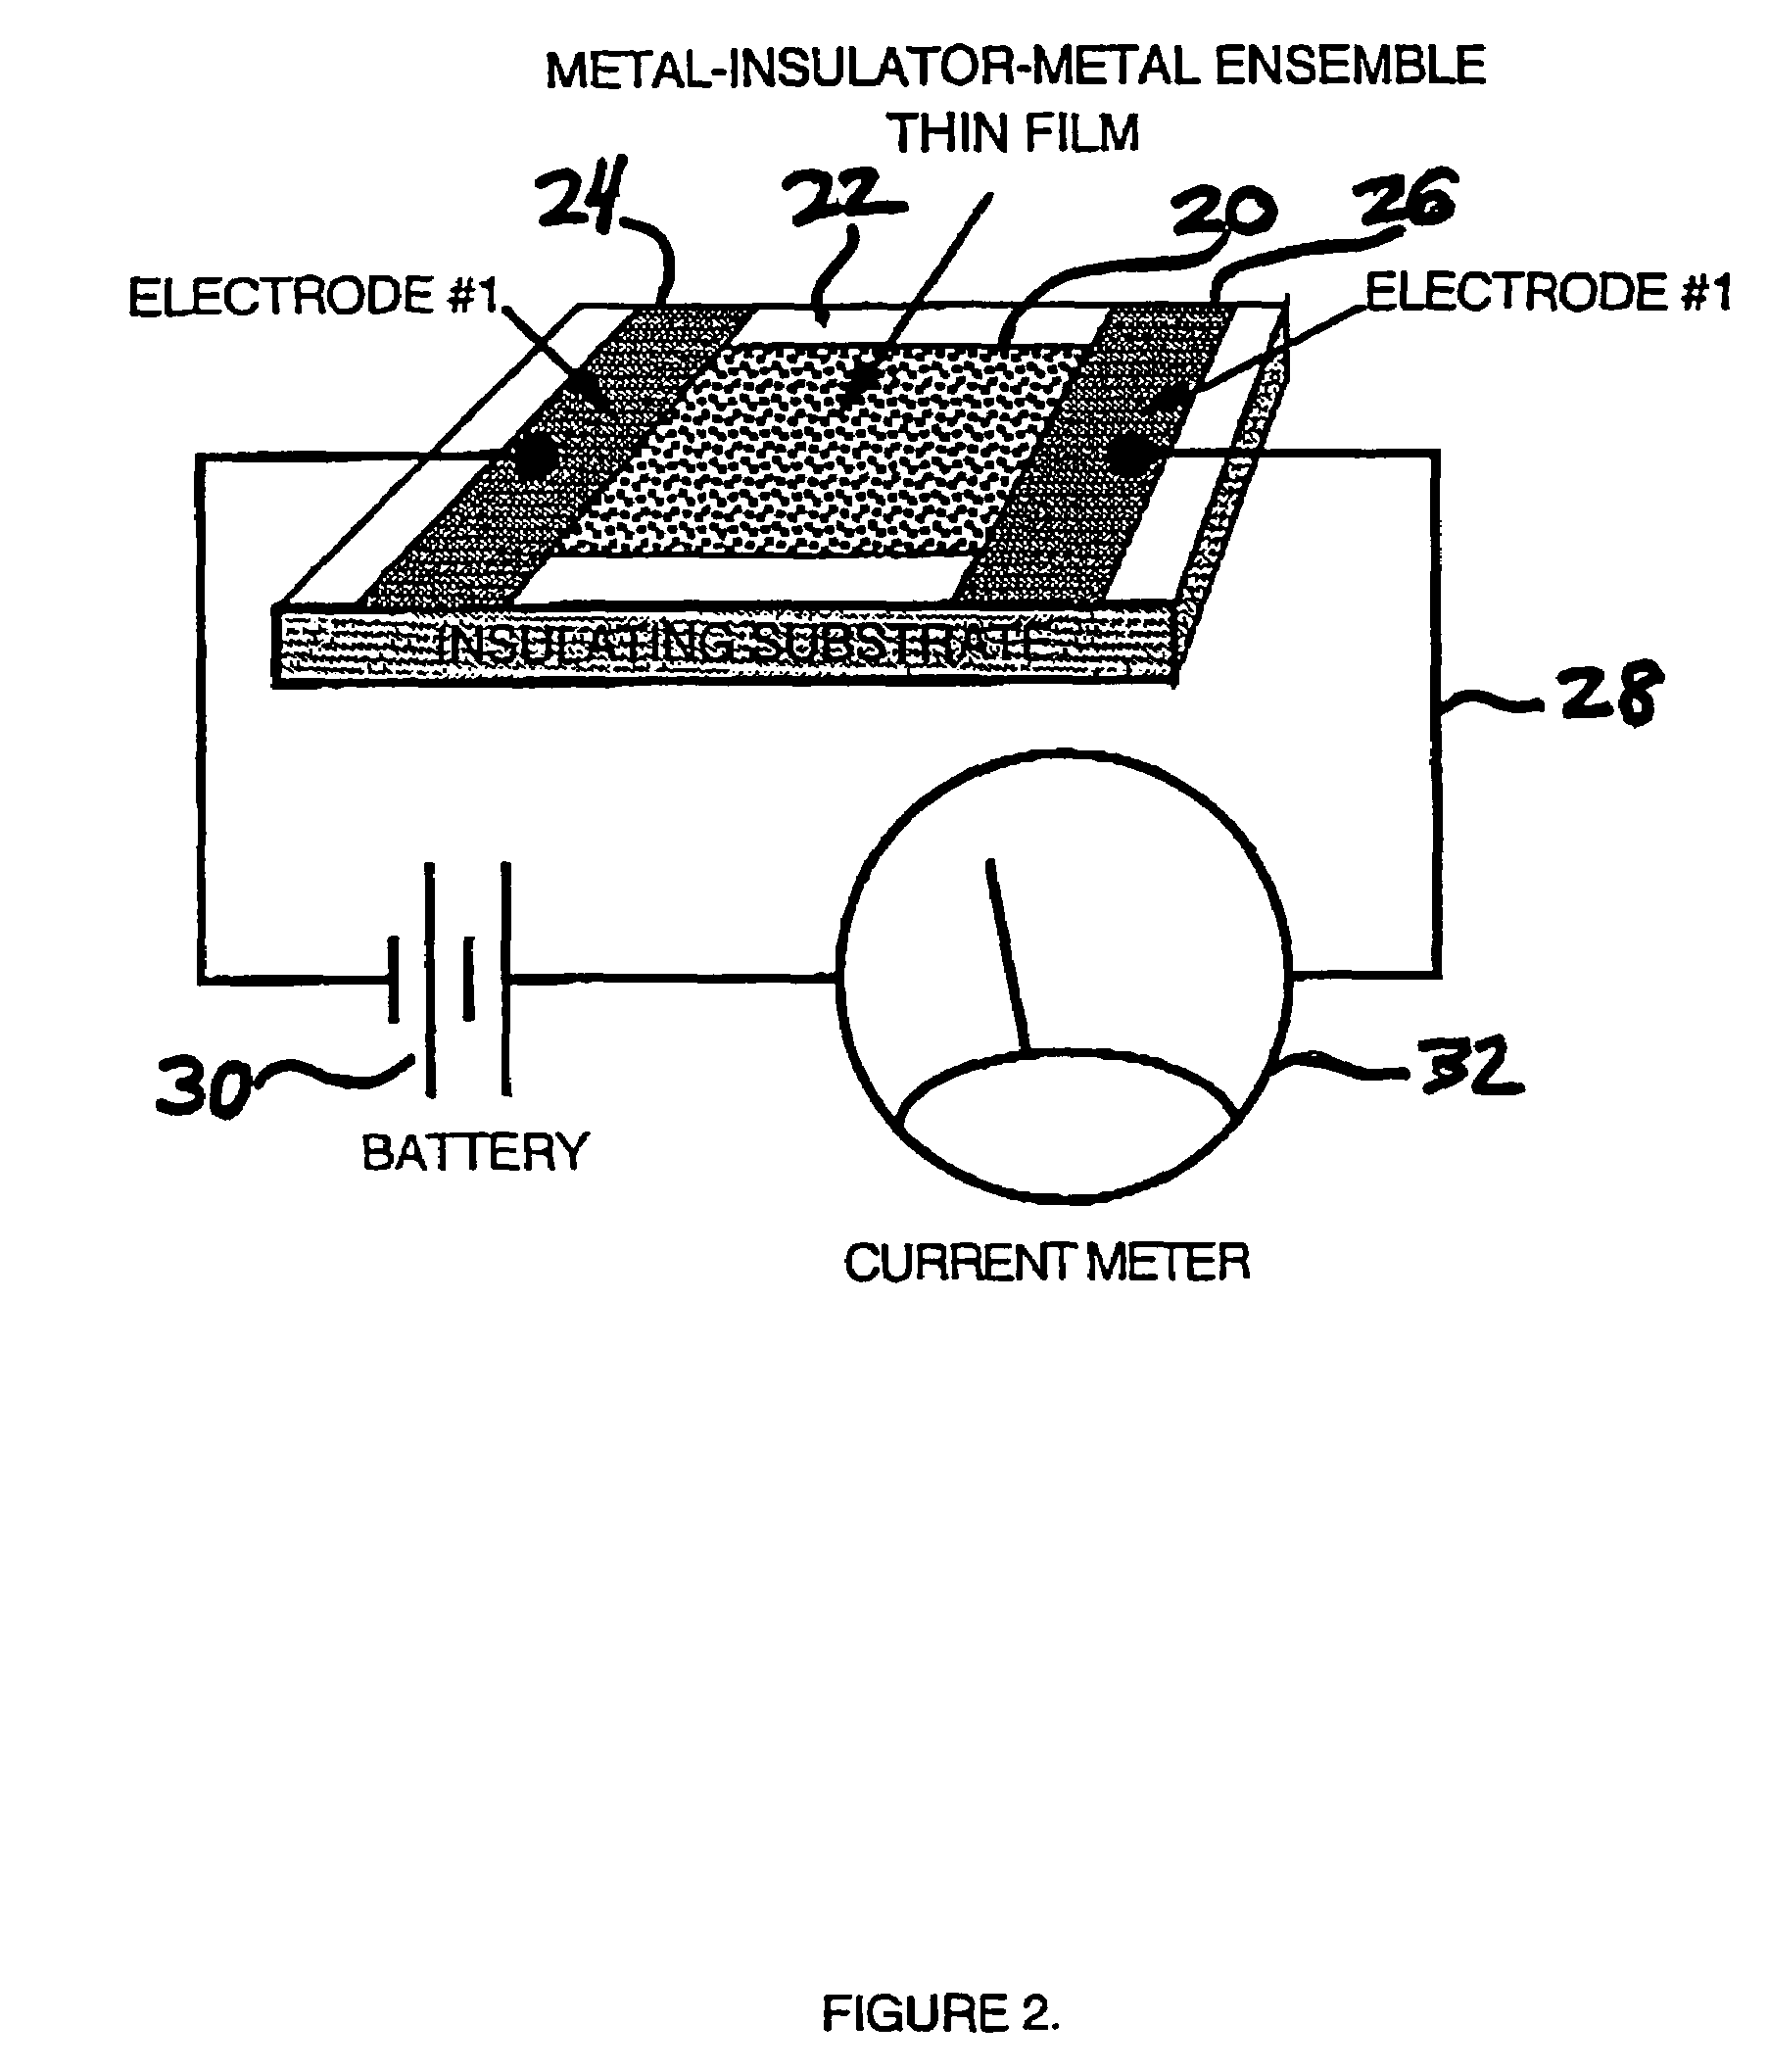 Materials, method and apparatus for detection and monitoring of chemical species